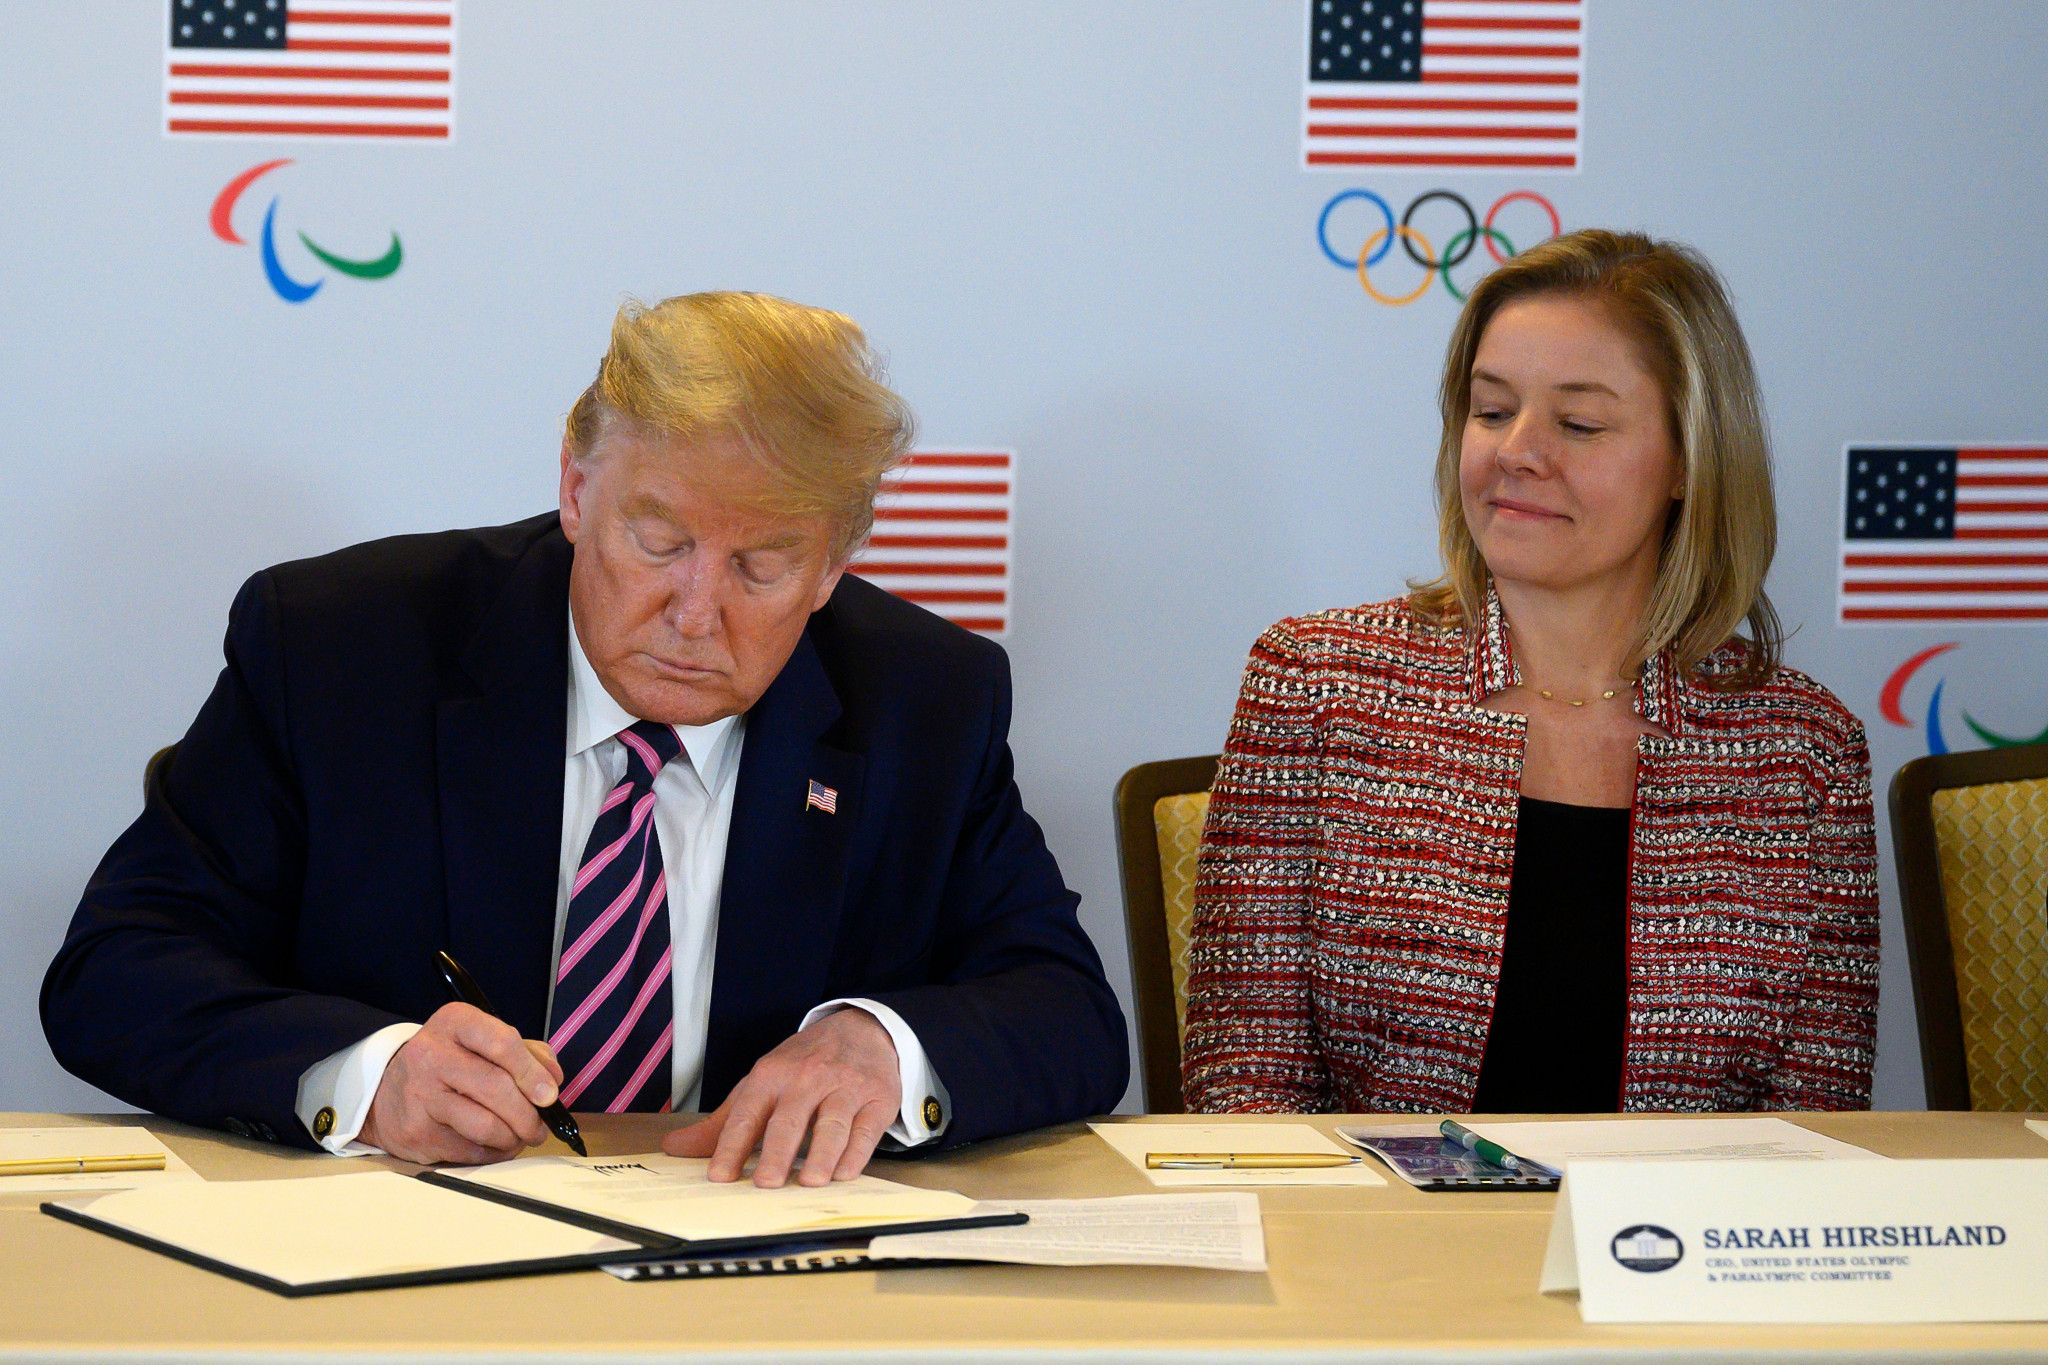 Donald Trump signs an agreement next to United States Olympic and Paralympic Committee chief executive Sarah Hirshland ©Getty Images